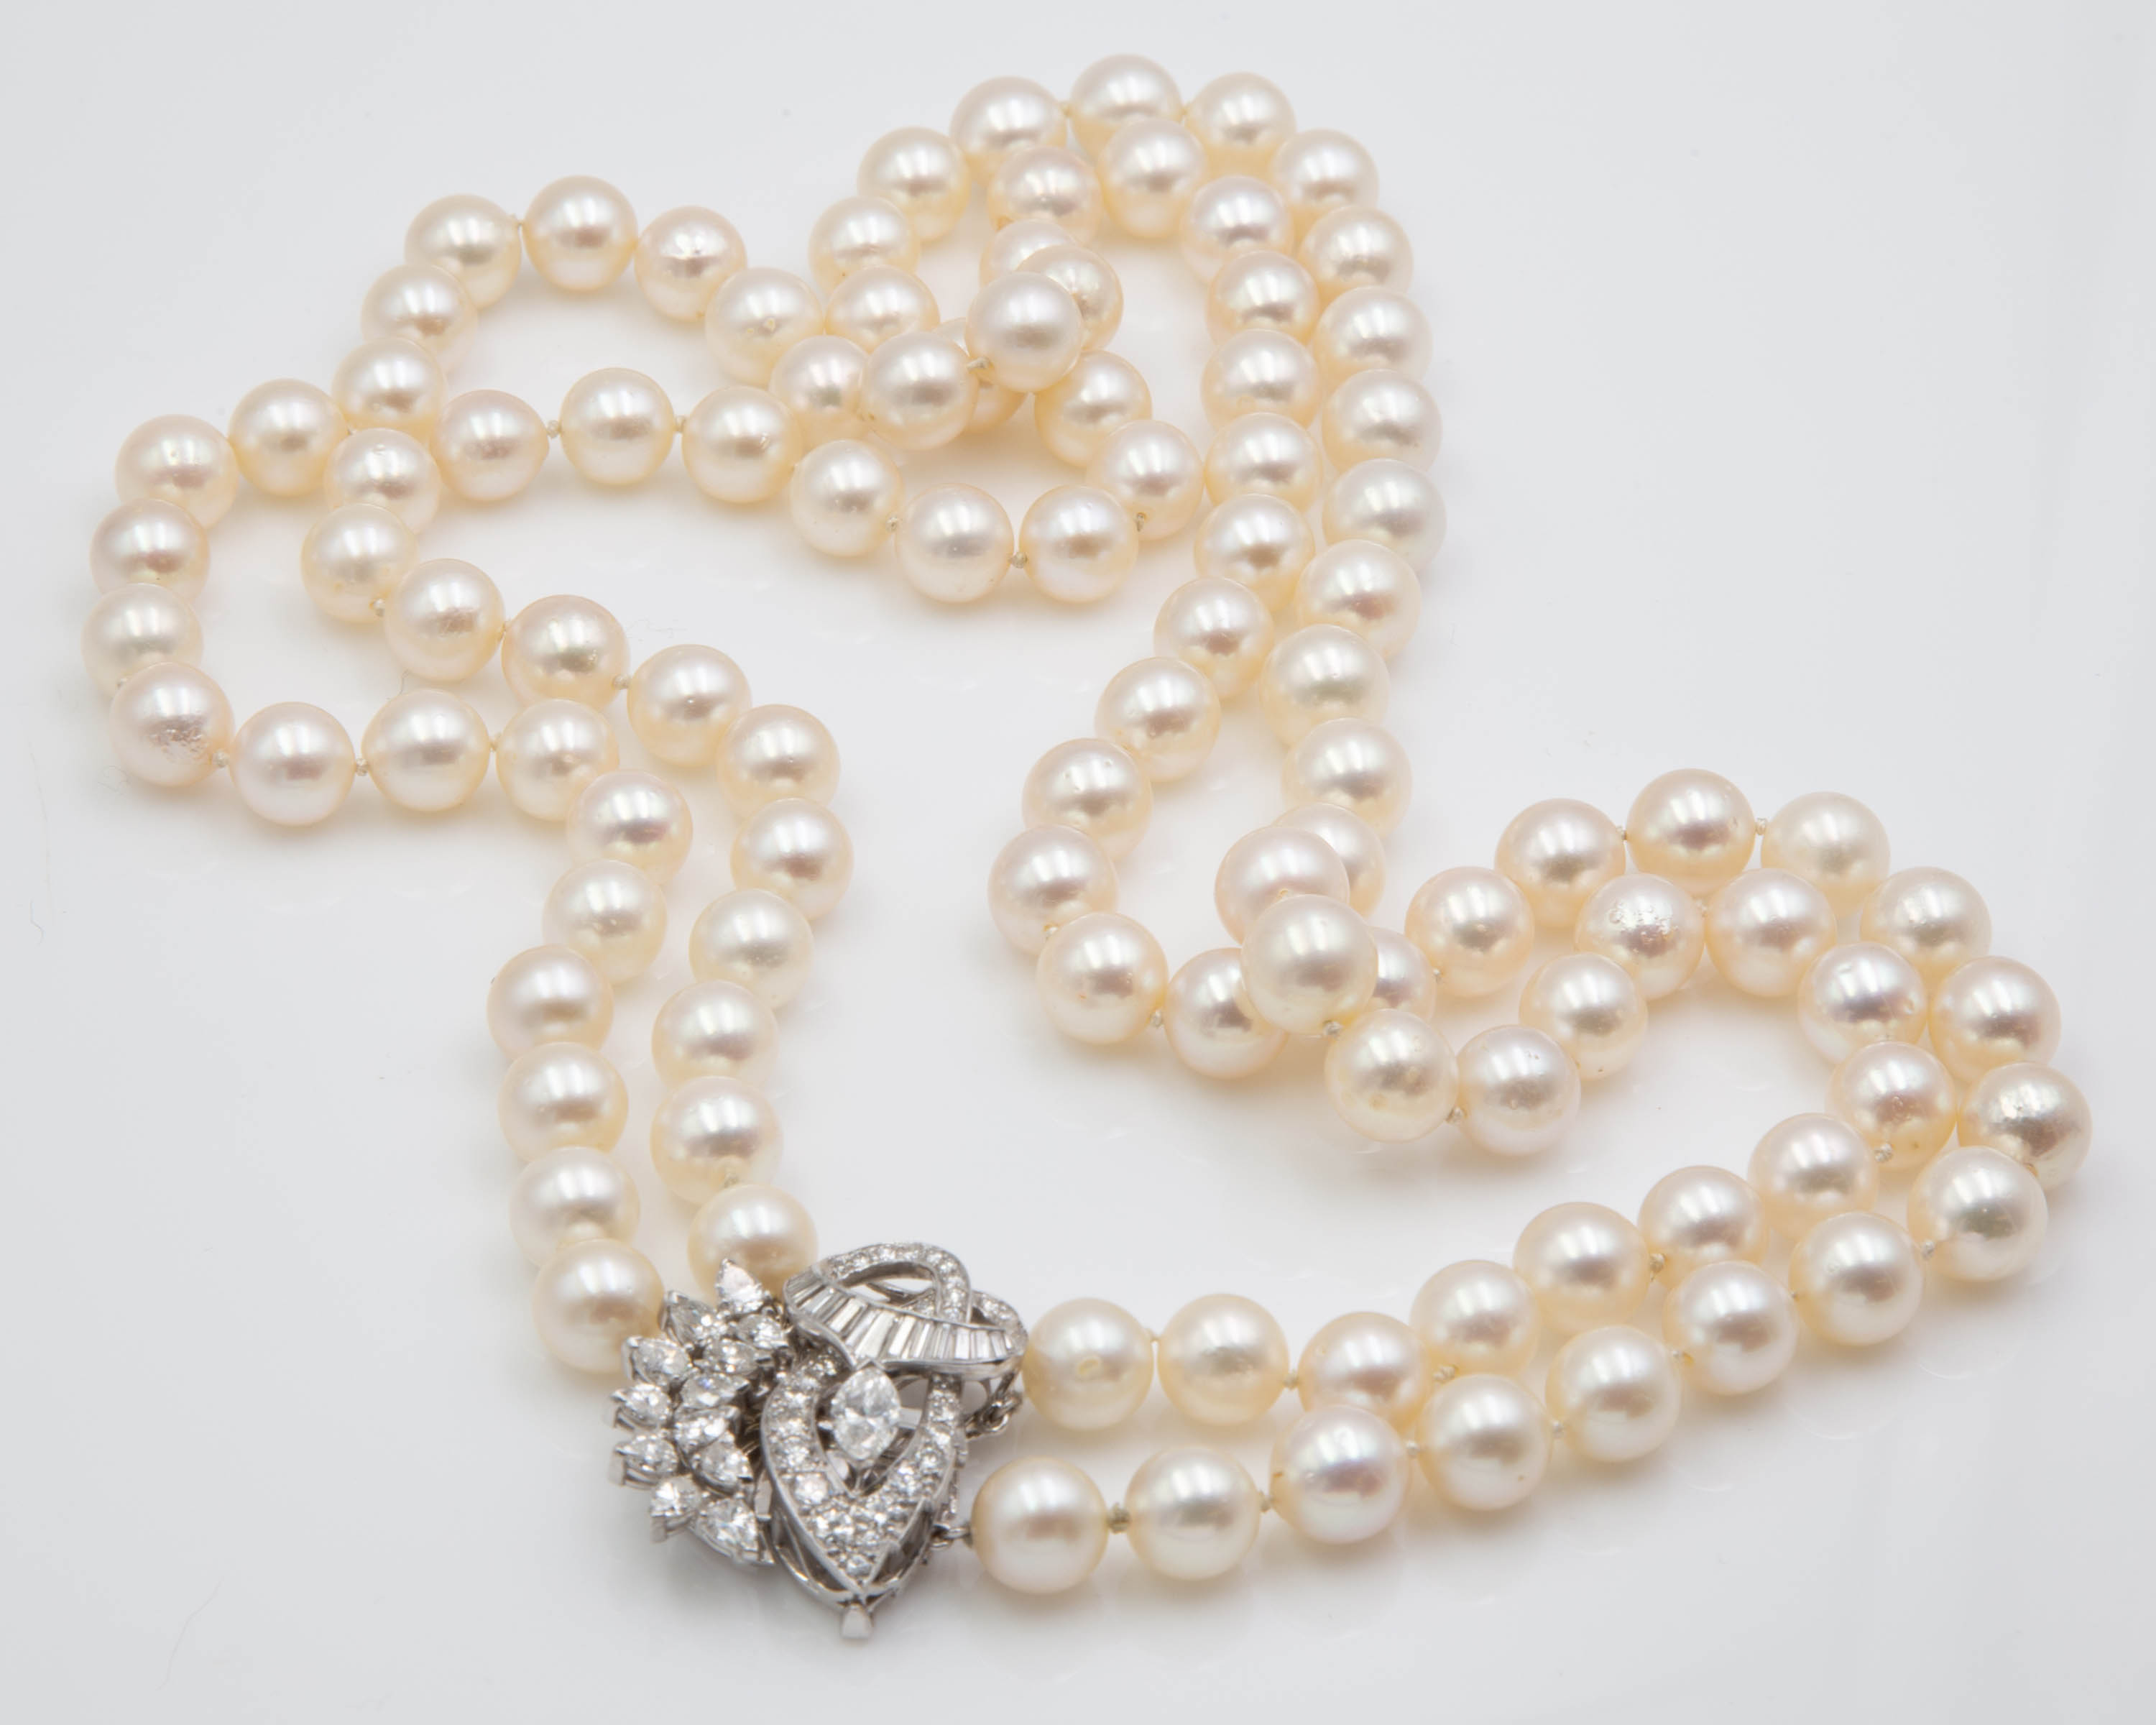 Double Strand Pearl Necklace with 14K Gold and Diamond Clasp